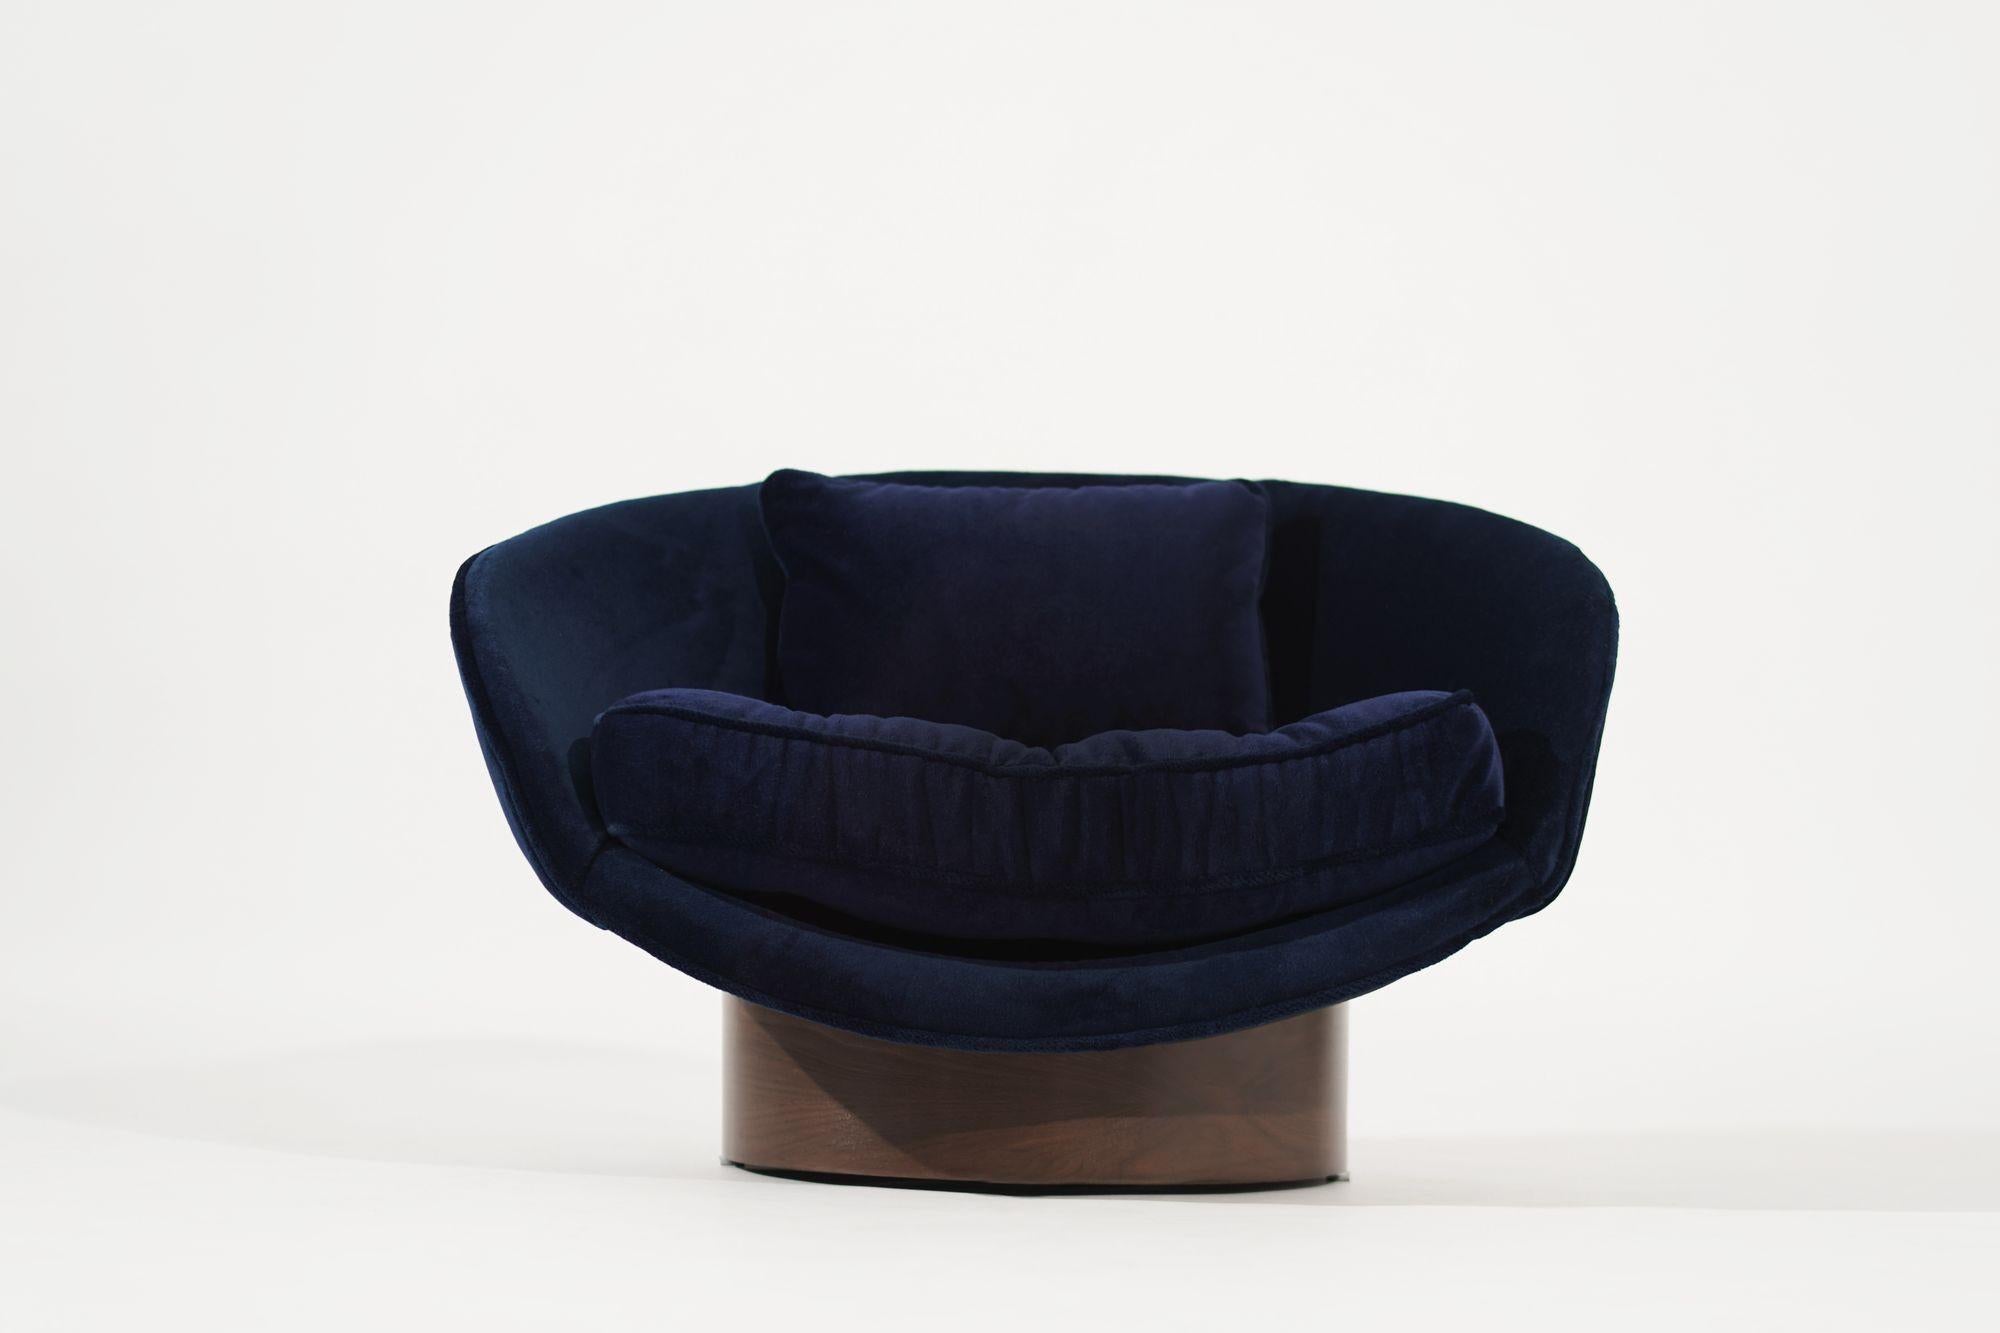 A meticulously restored low profile chair by Adrian Pearsall. Fully revived to its original splendor, this chair boasts impeccable navy blue alpaca velvet upholstery, reflecting both vintage allure and enduring quality. With its sleek lines and